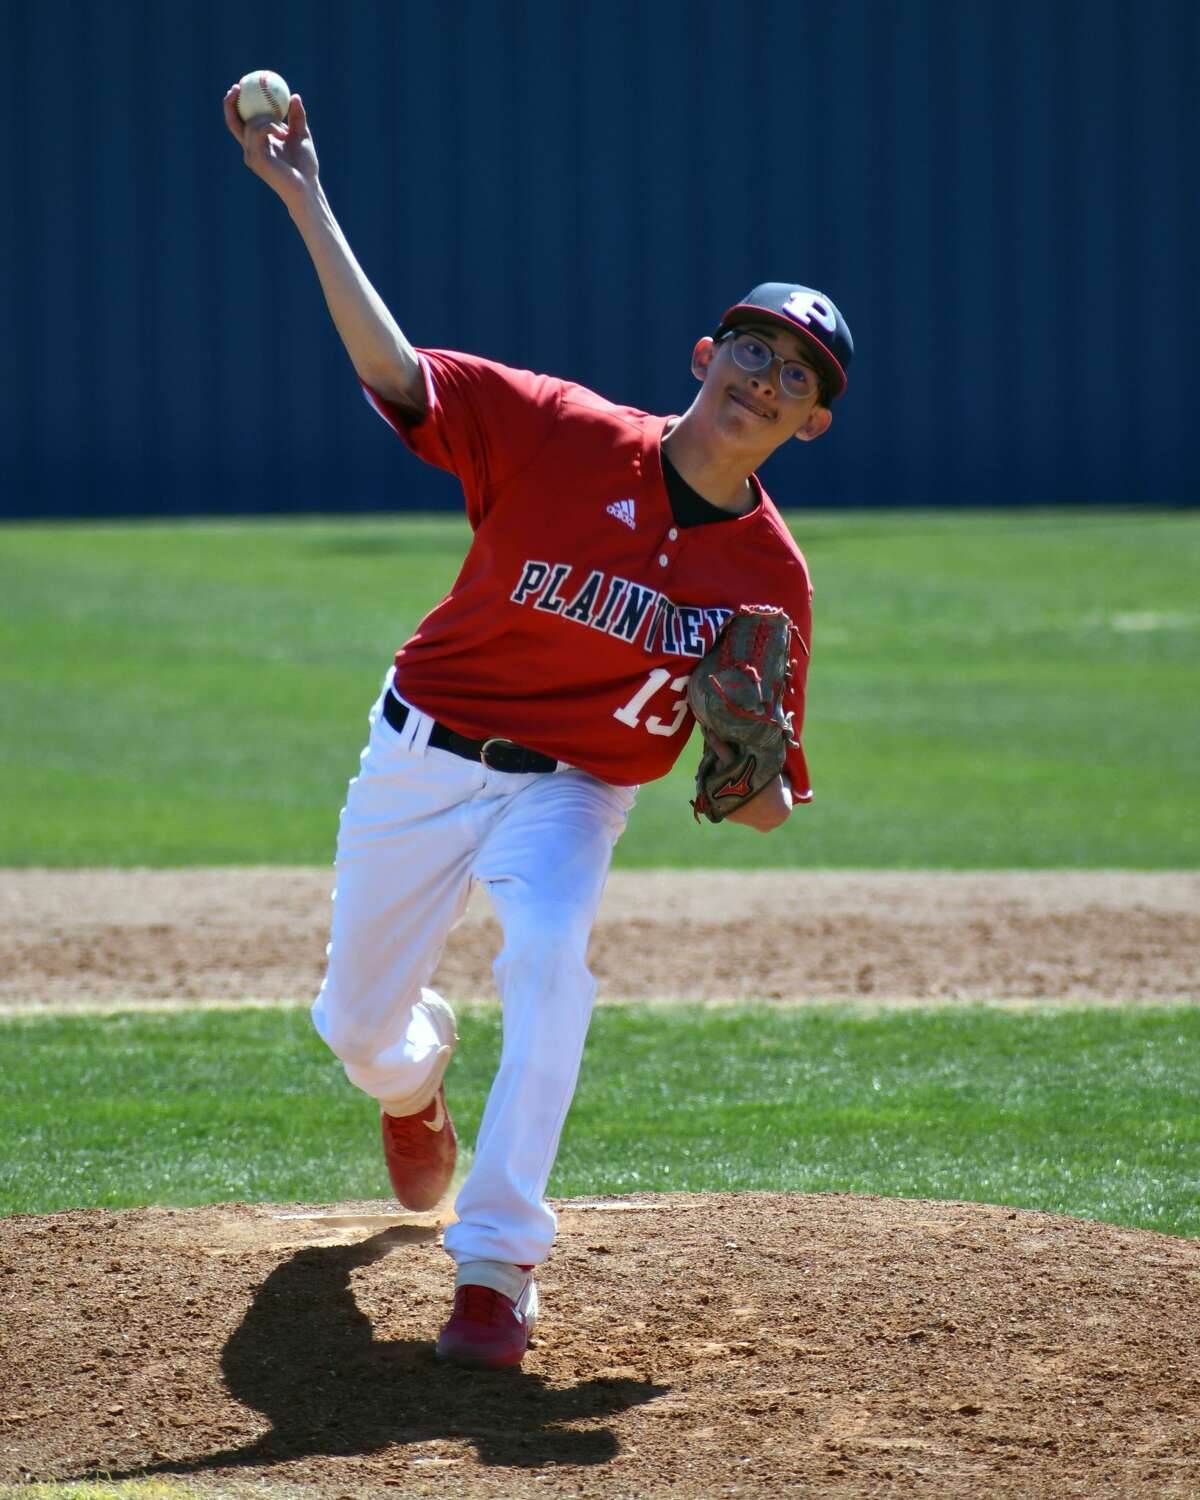 Plainview defeated Amarillo Tascosa 7-3 in a District 3-5A baseball game on Saturday at Bulldog Park.